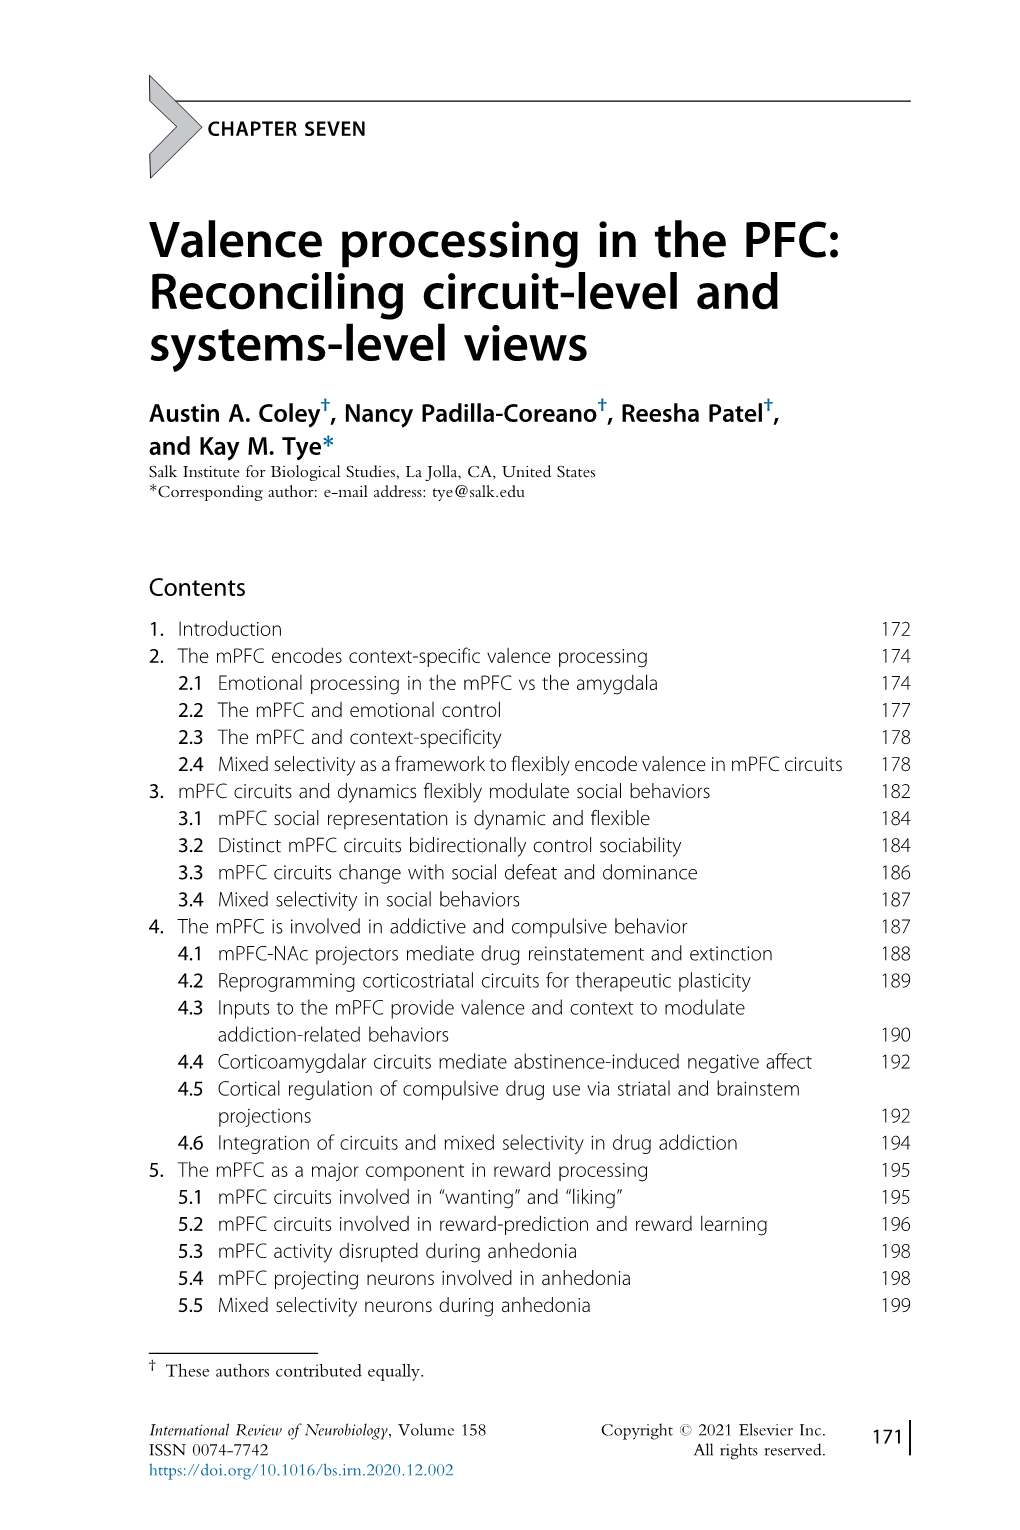 Valence Processing in the PFC: Reconciling Circuit-Level and Systems-Level Views